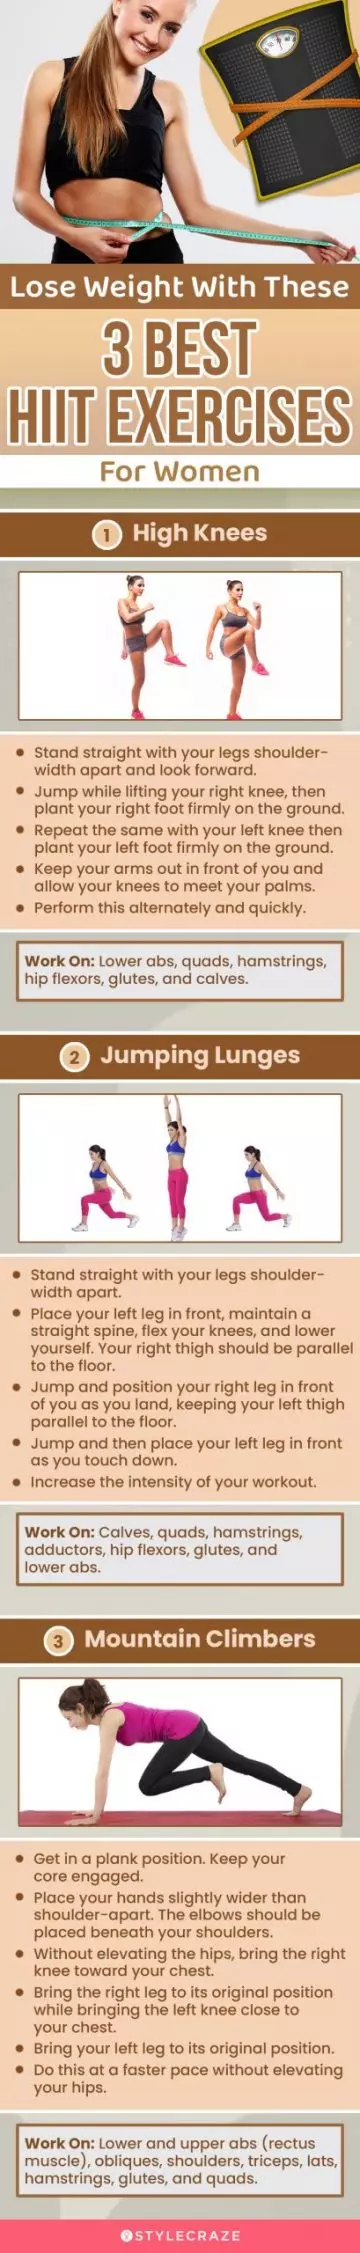 lose weight with these 3 best hiit exercises for women (infographic)